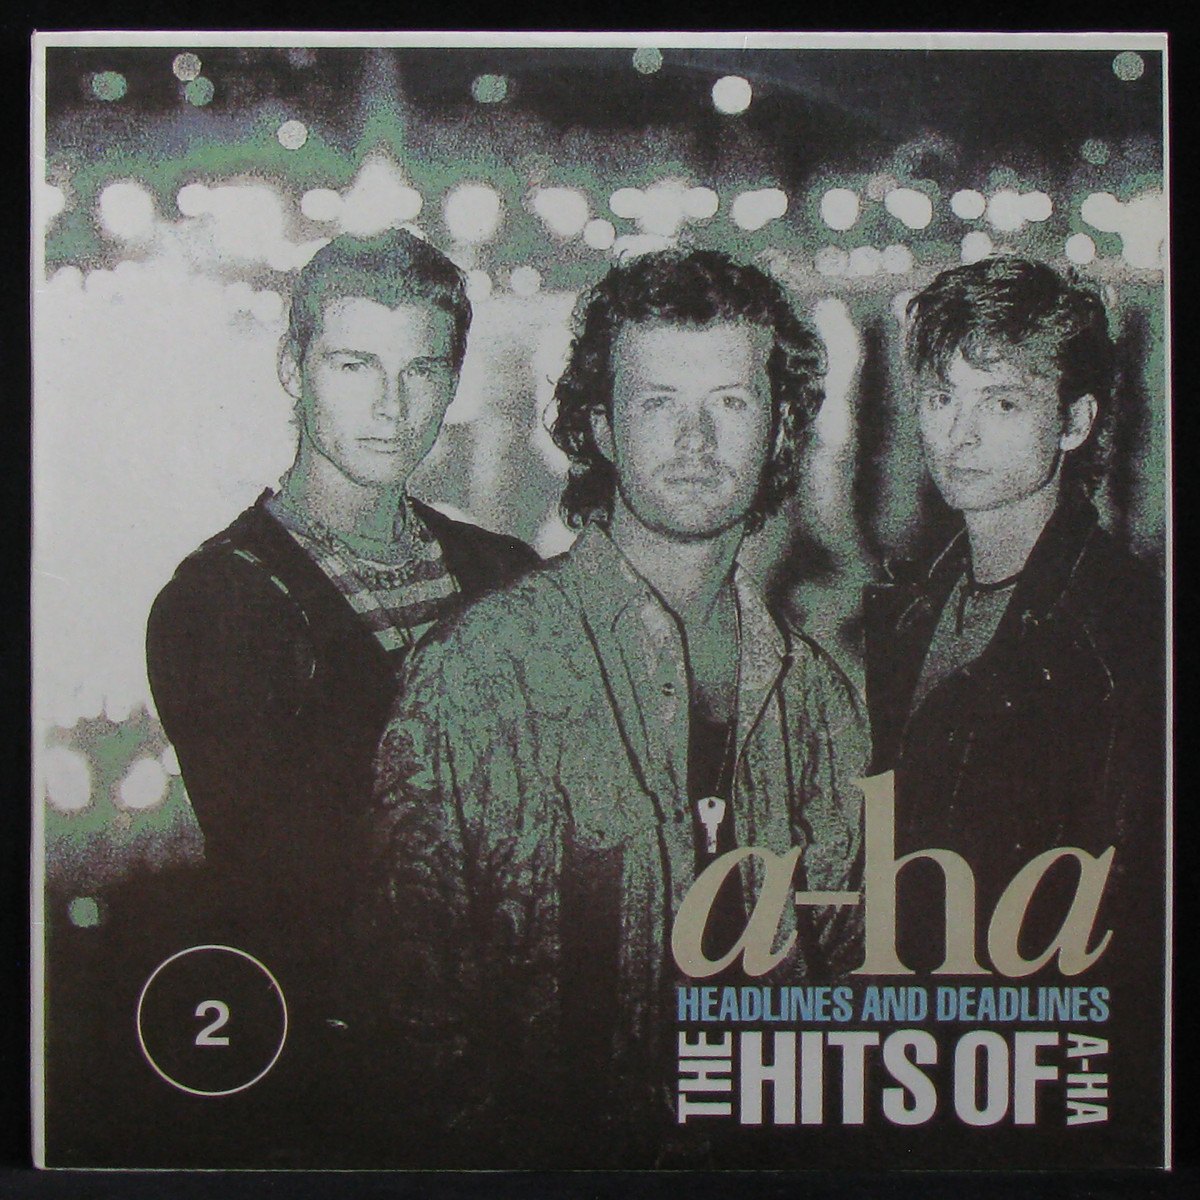 Headlines And Deadlines: The Hits Of A-Ha - 2